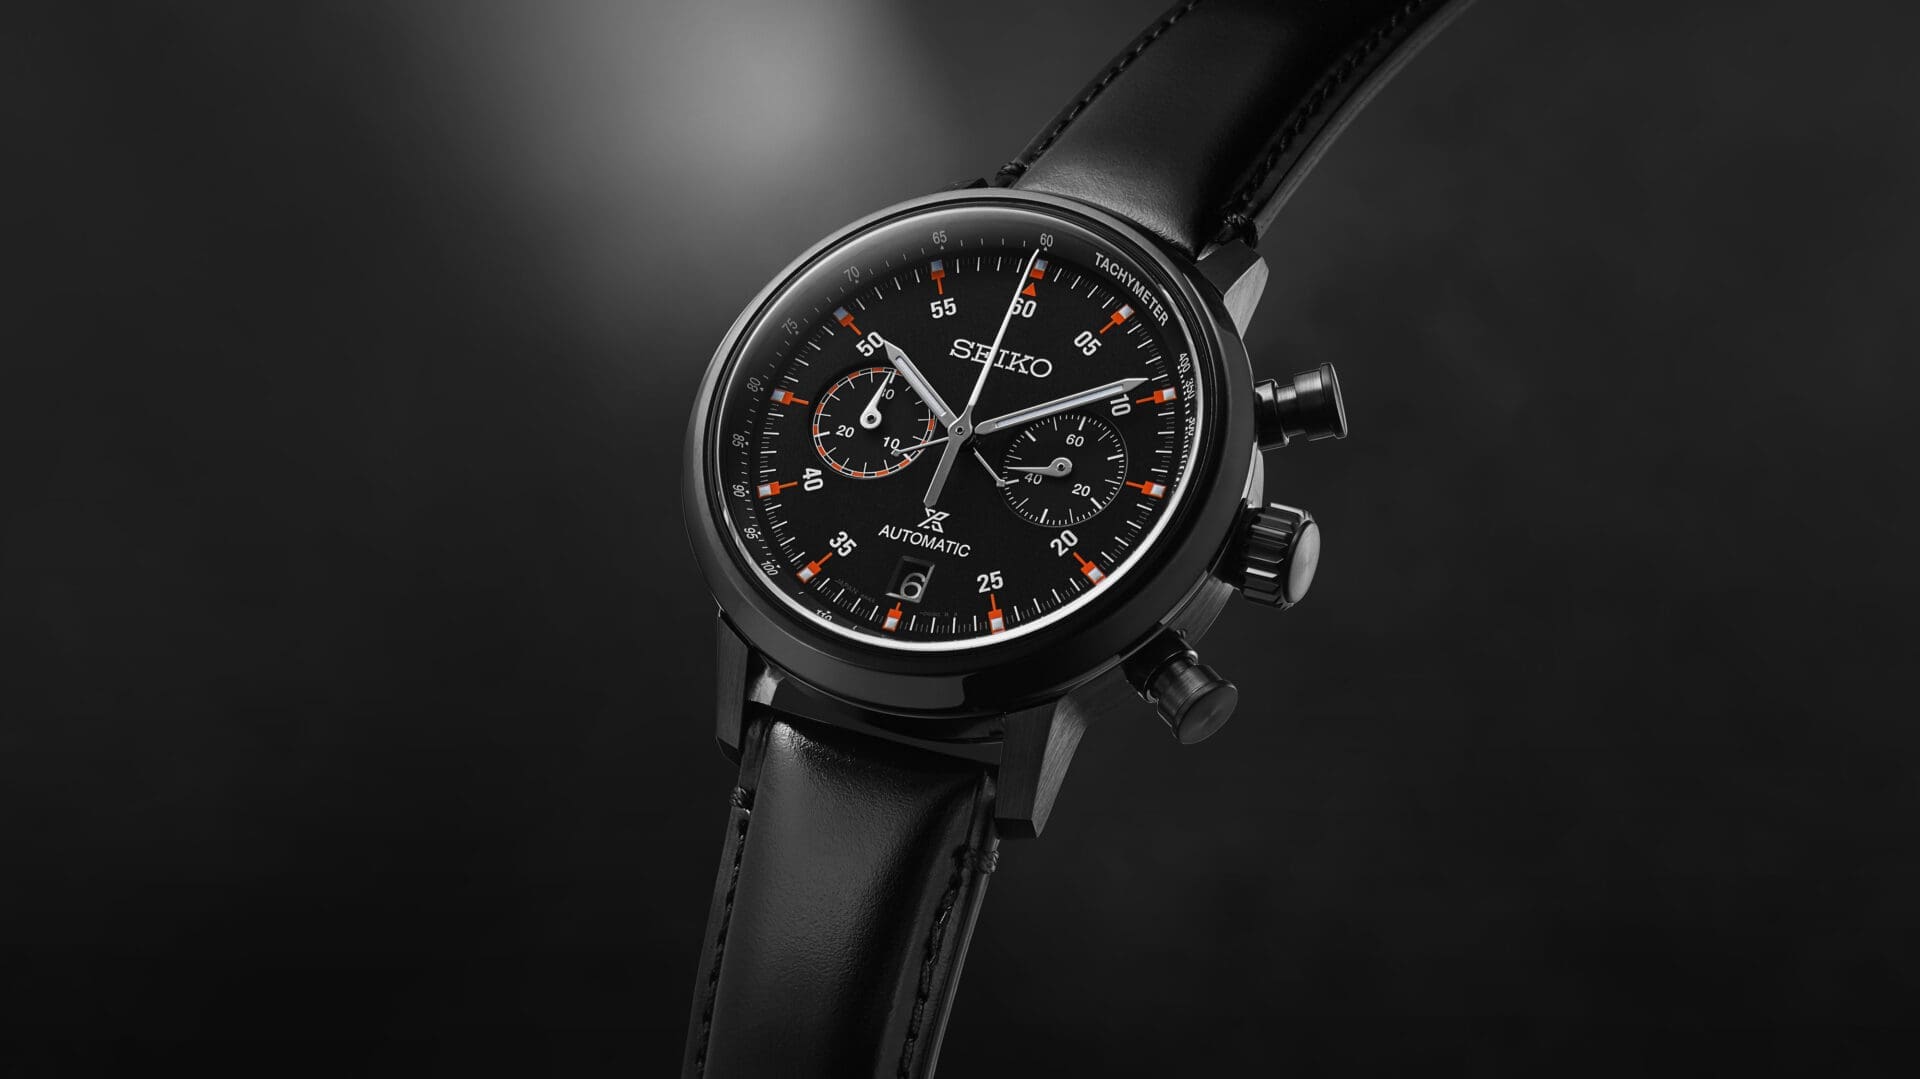 INTRODUCING: The Seiko Speedtimer Mechanical Chronograph SRQ045 conjures black magic from a historical stopwatch